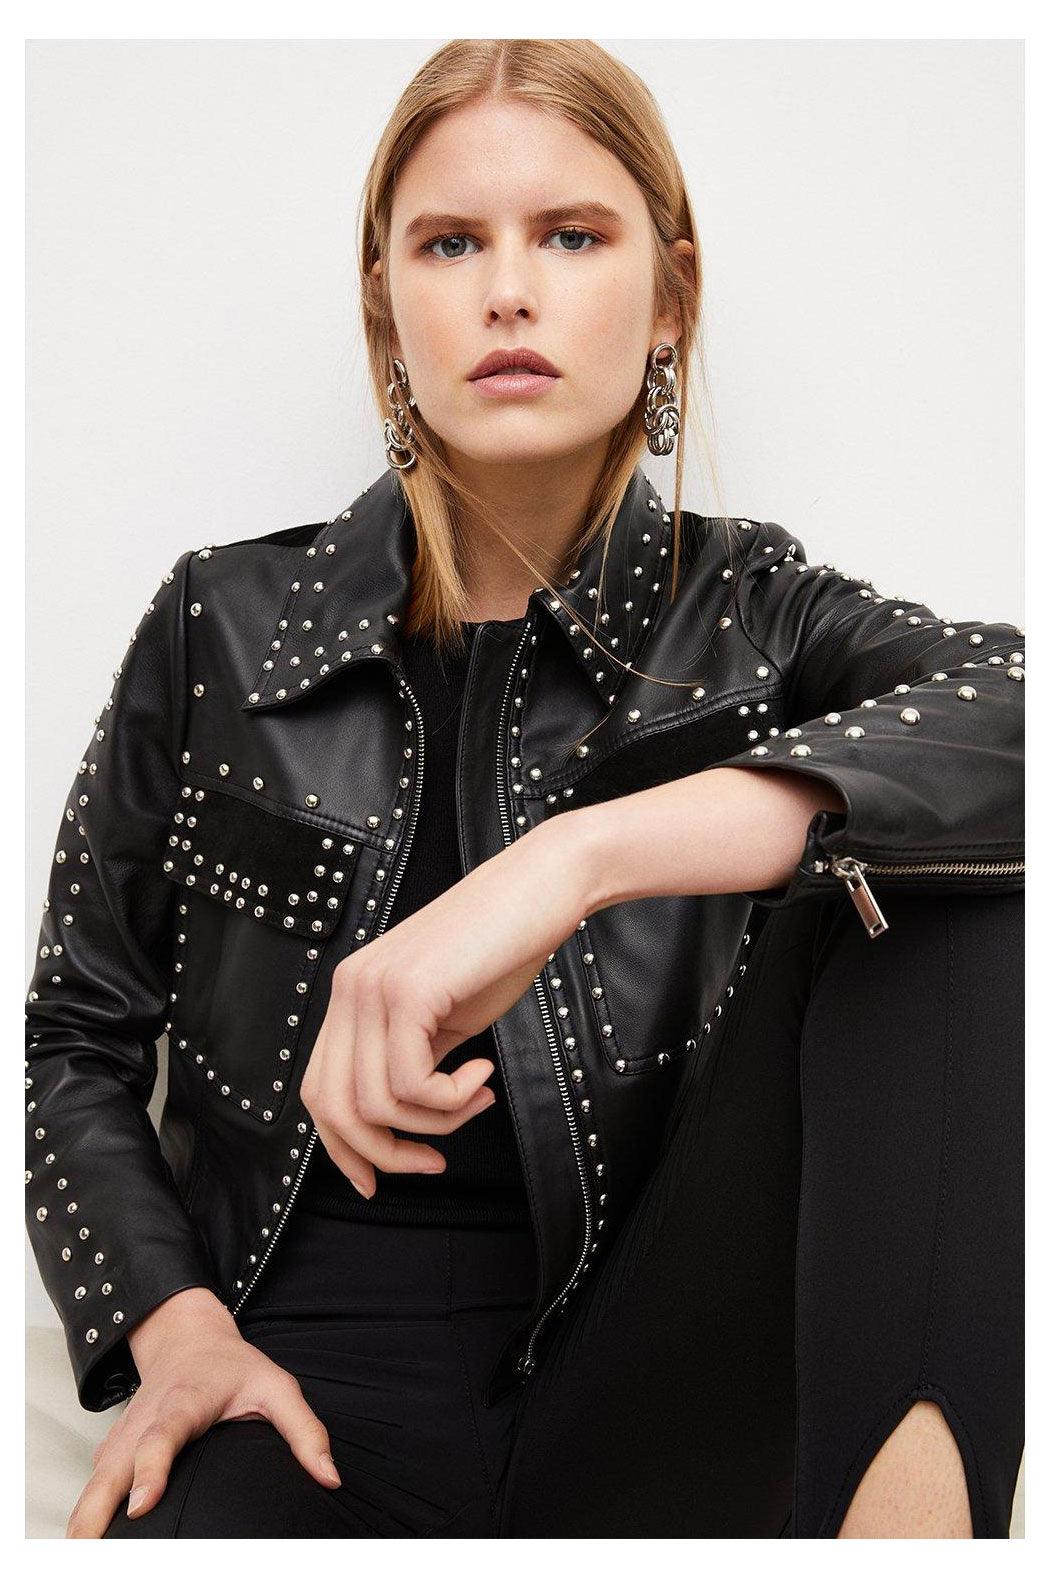 Women Black style Silver Spiked Studded Leather Biker Jacket - Leather Loom